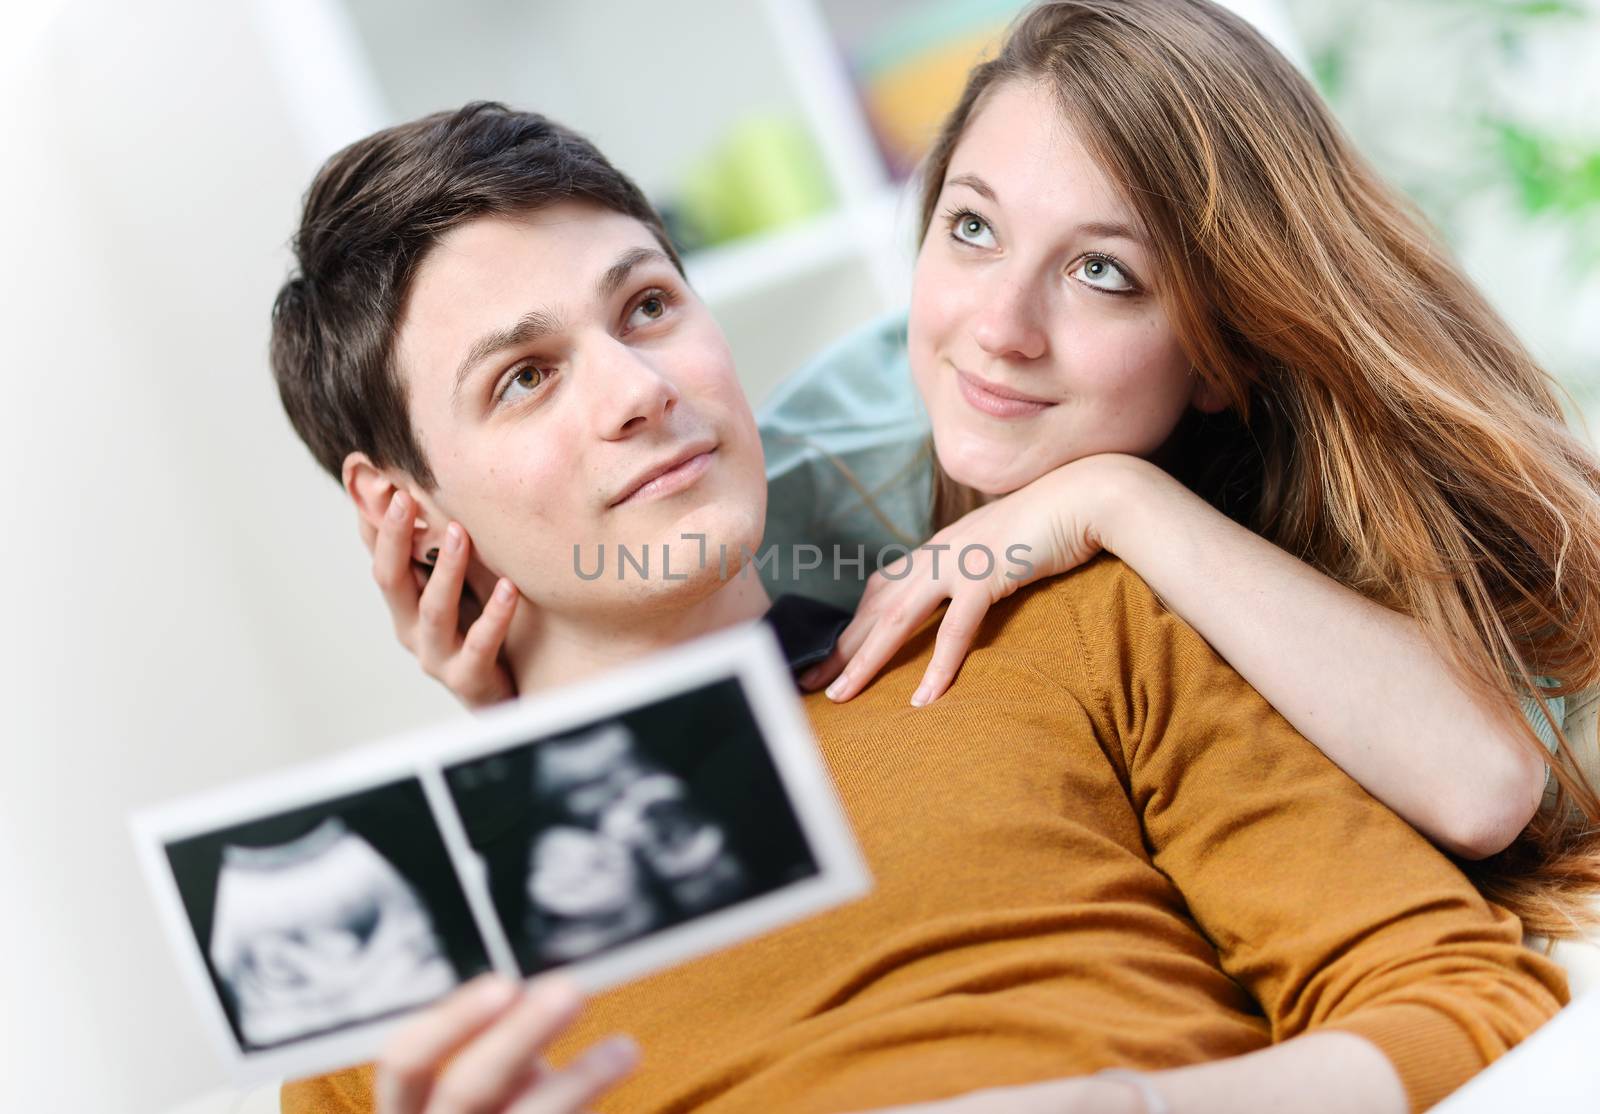 Cute couple imagines the future of their unborn child with ultrasound pictures in hands